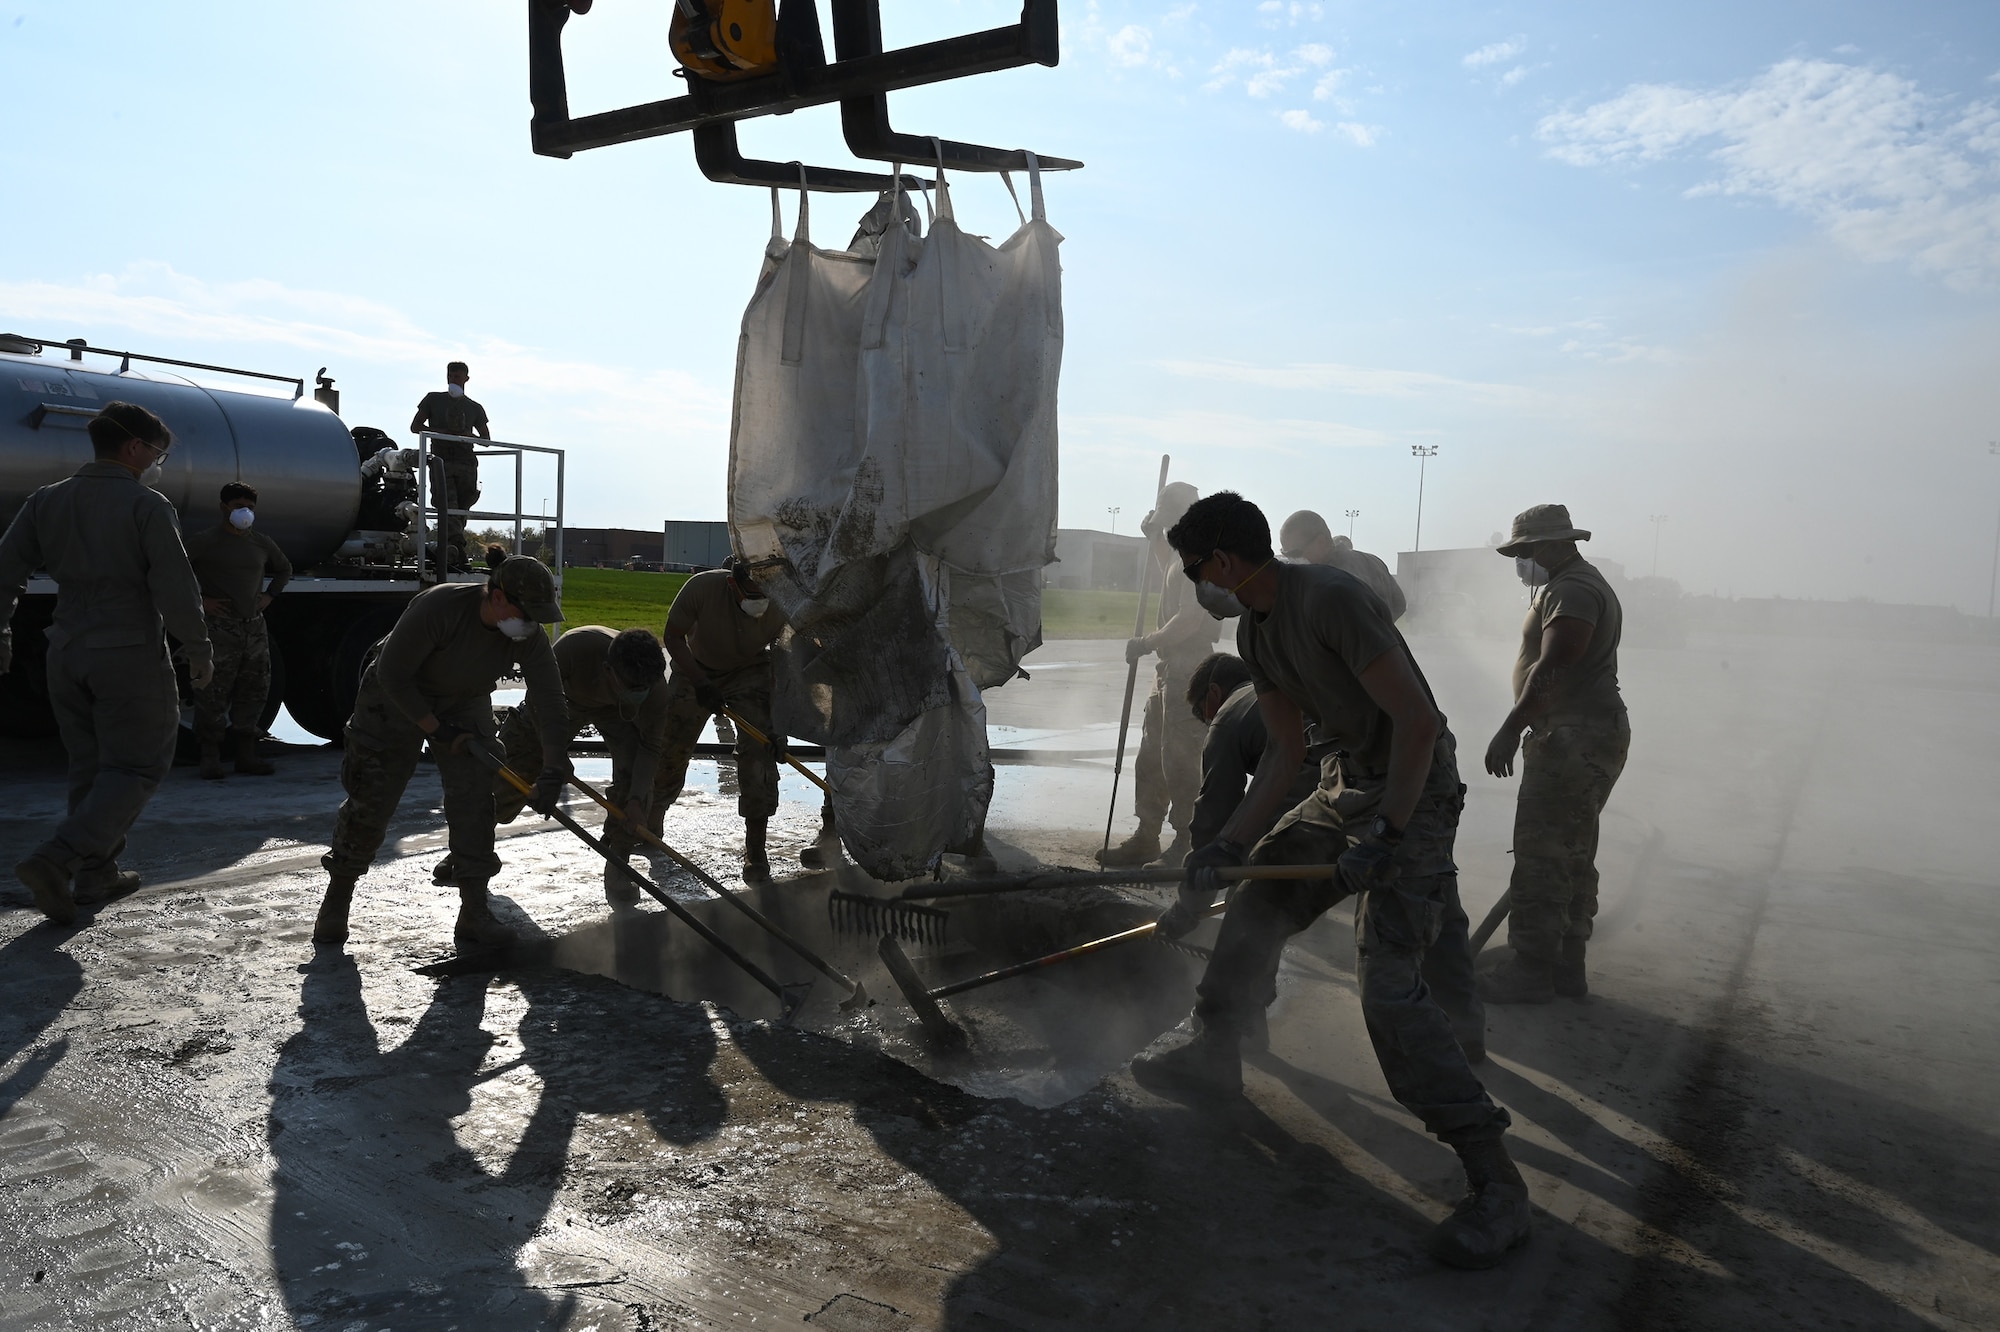 Eight military members rake liquid concrete material in a square hope on a concrete training runway at the North Dakota Air National Guard Base Regional Training Site, Fargo, N.D., Sept. 30, 2021.